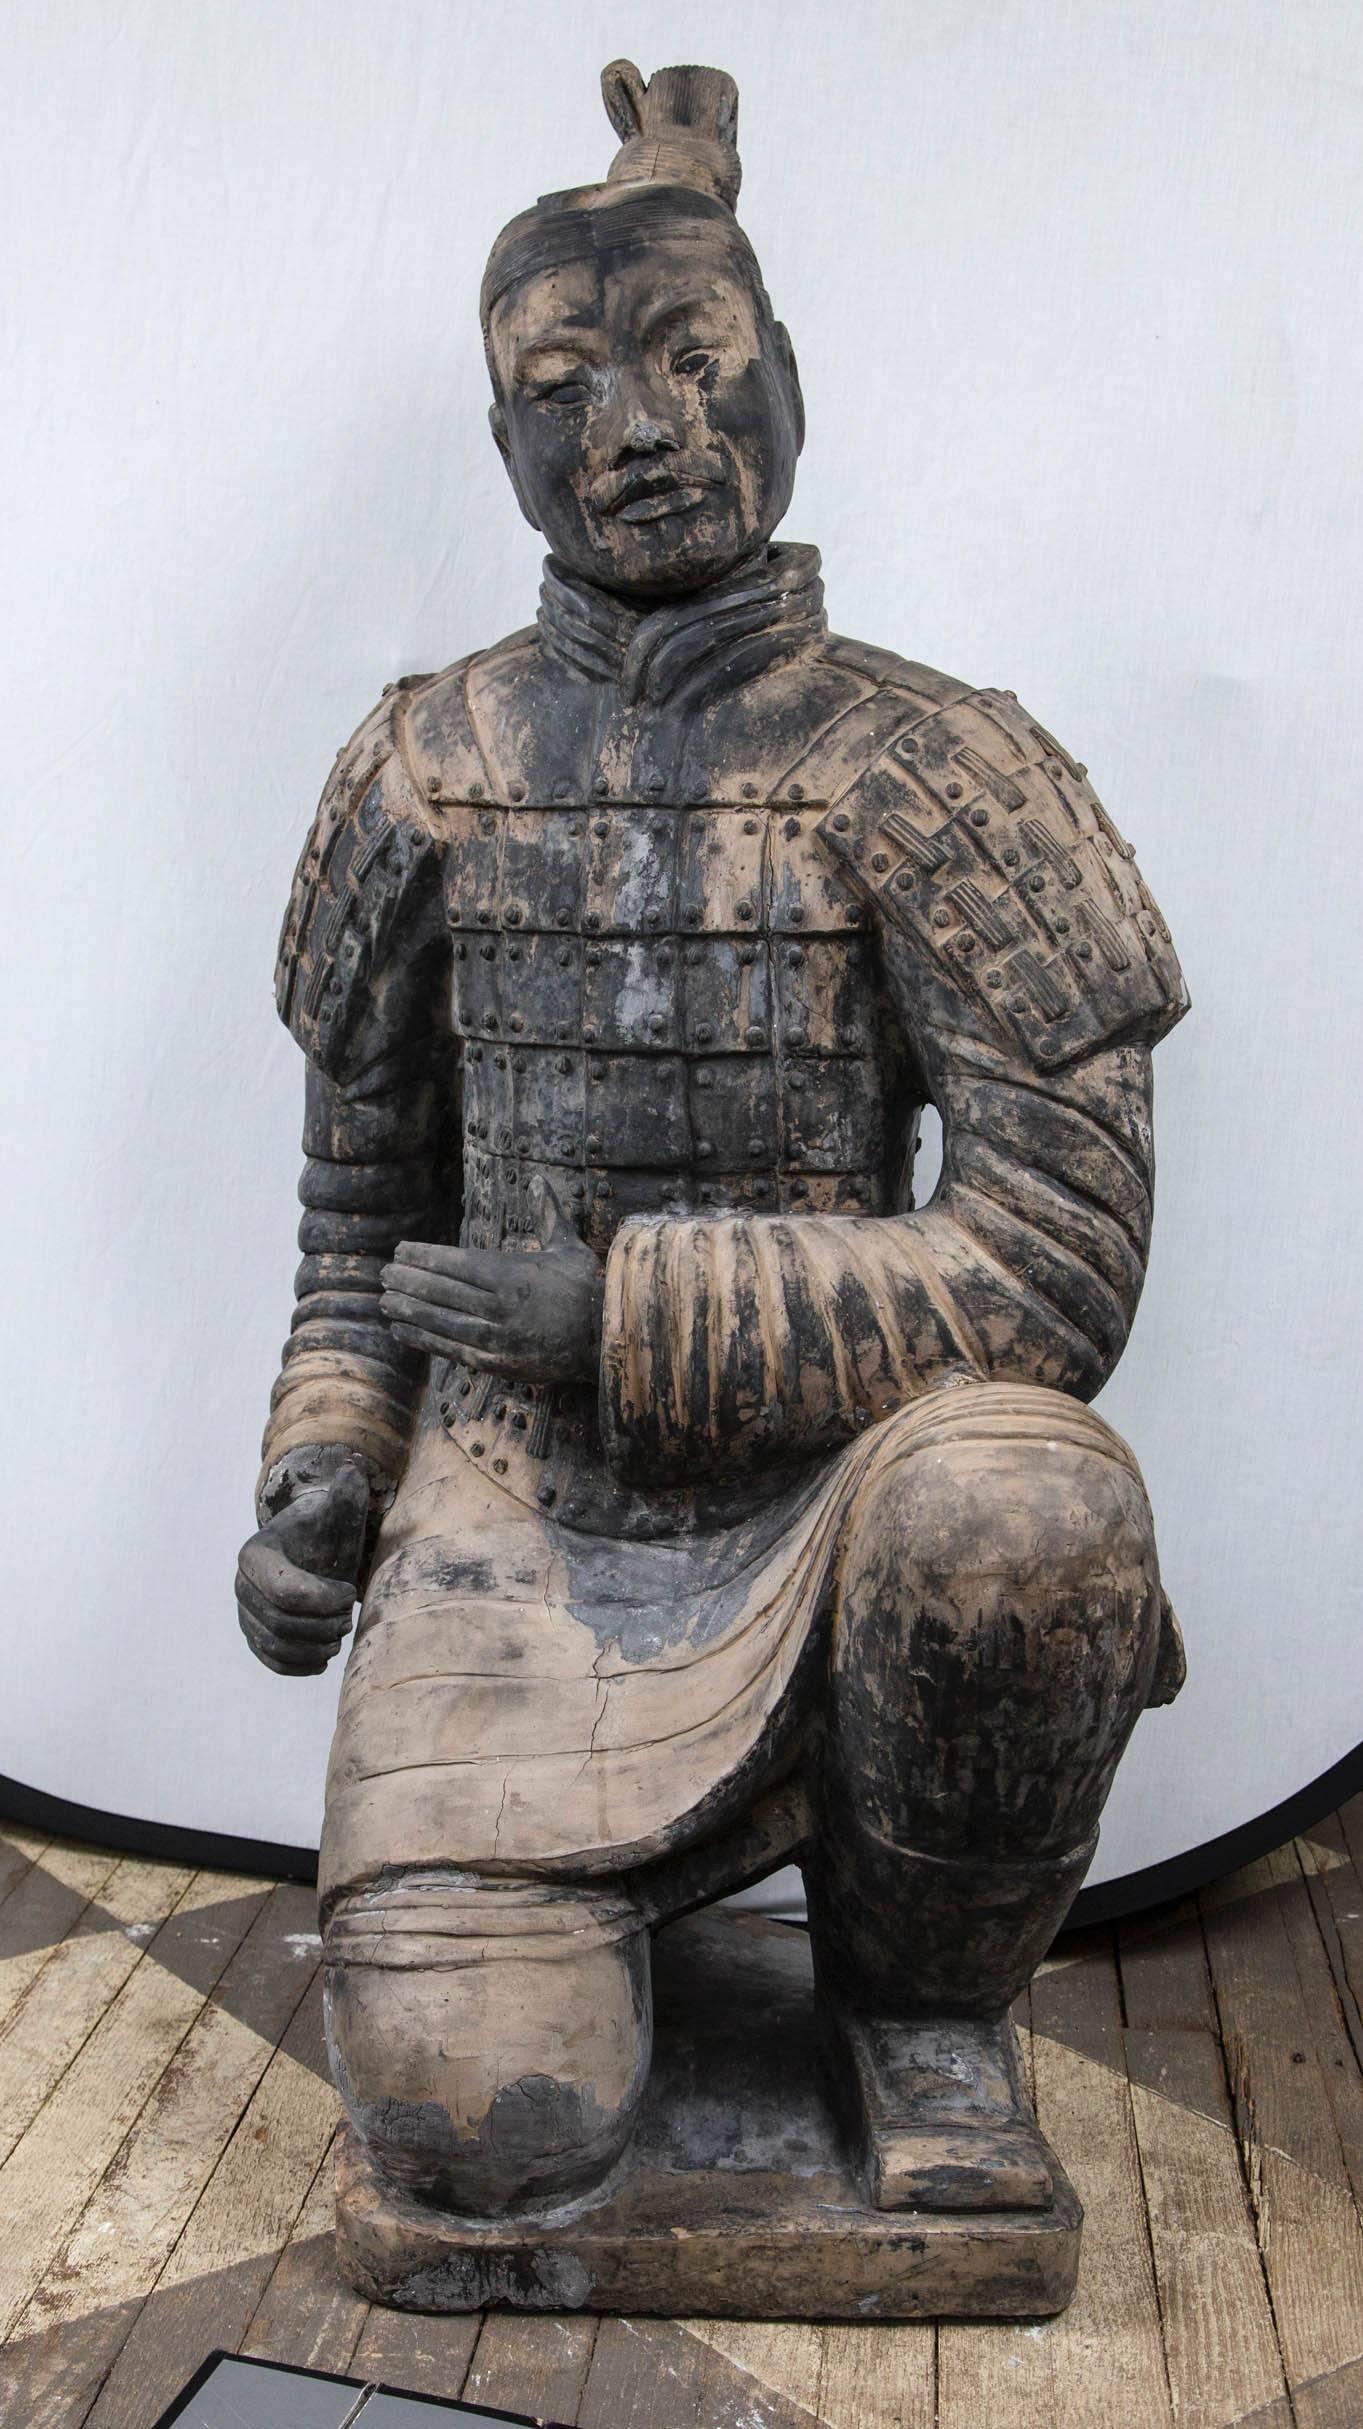 Now you can start your own collection of Chinese warriors, like the ancient Emperor.
He is a later copy, of course, He wears a full suit of armor and is in a kneeling position. His head is a separate piece. The discolorizations are intentional, to